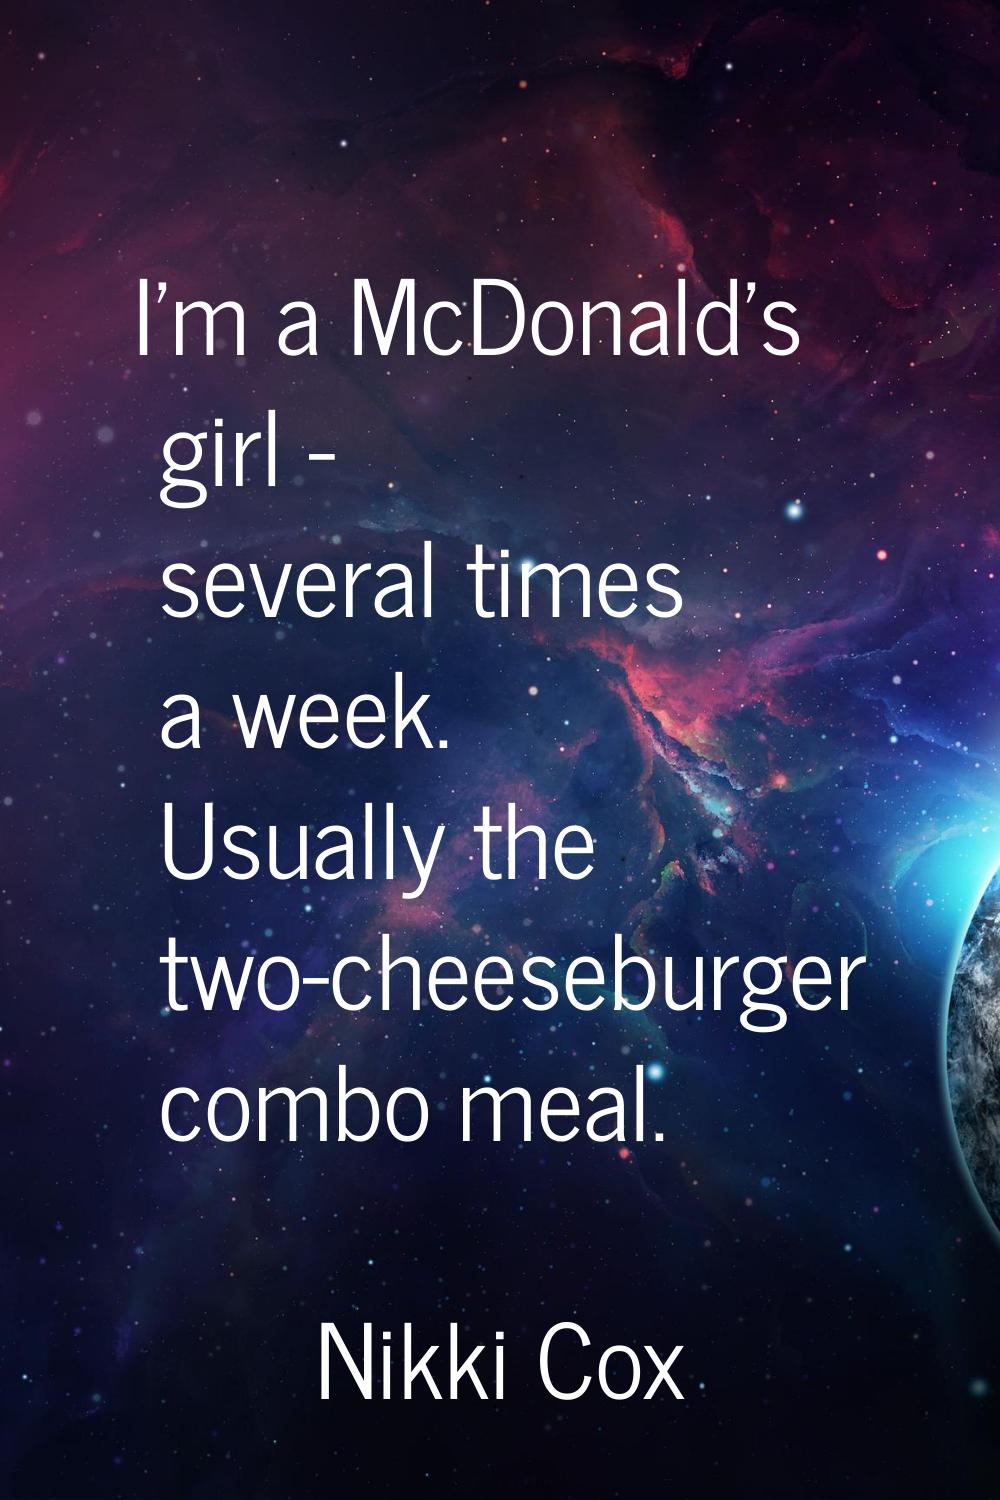 I'm a McDonald's girl - several times a week. Usually the two-cheeseburger combo meal.